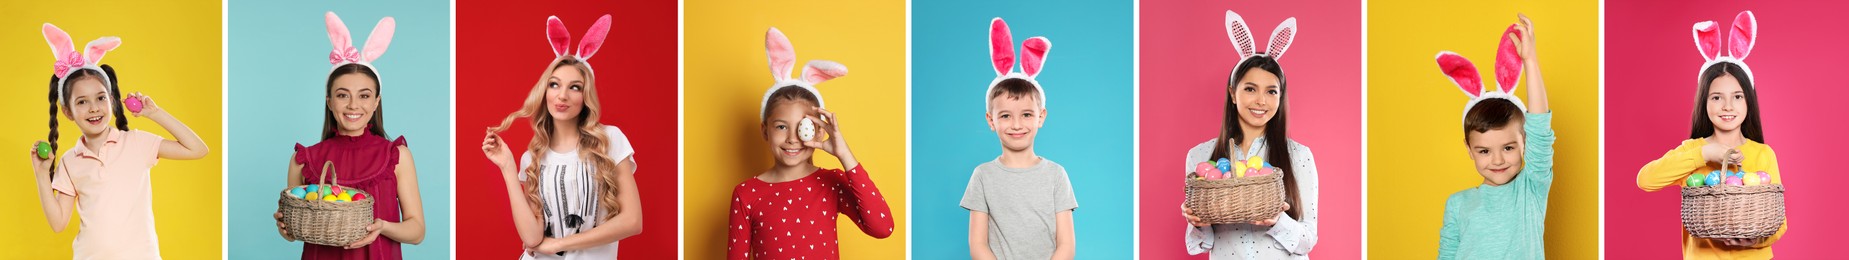 Image of Collage photos of people wearing bunny ears headbands on different color backgrounds, banner design. Happy Easter